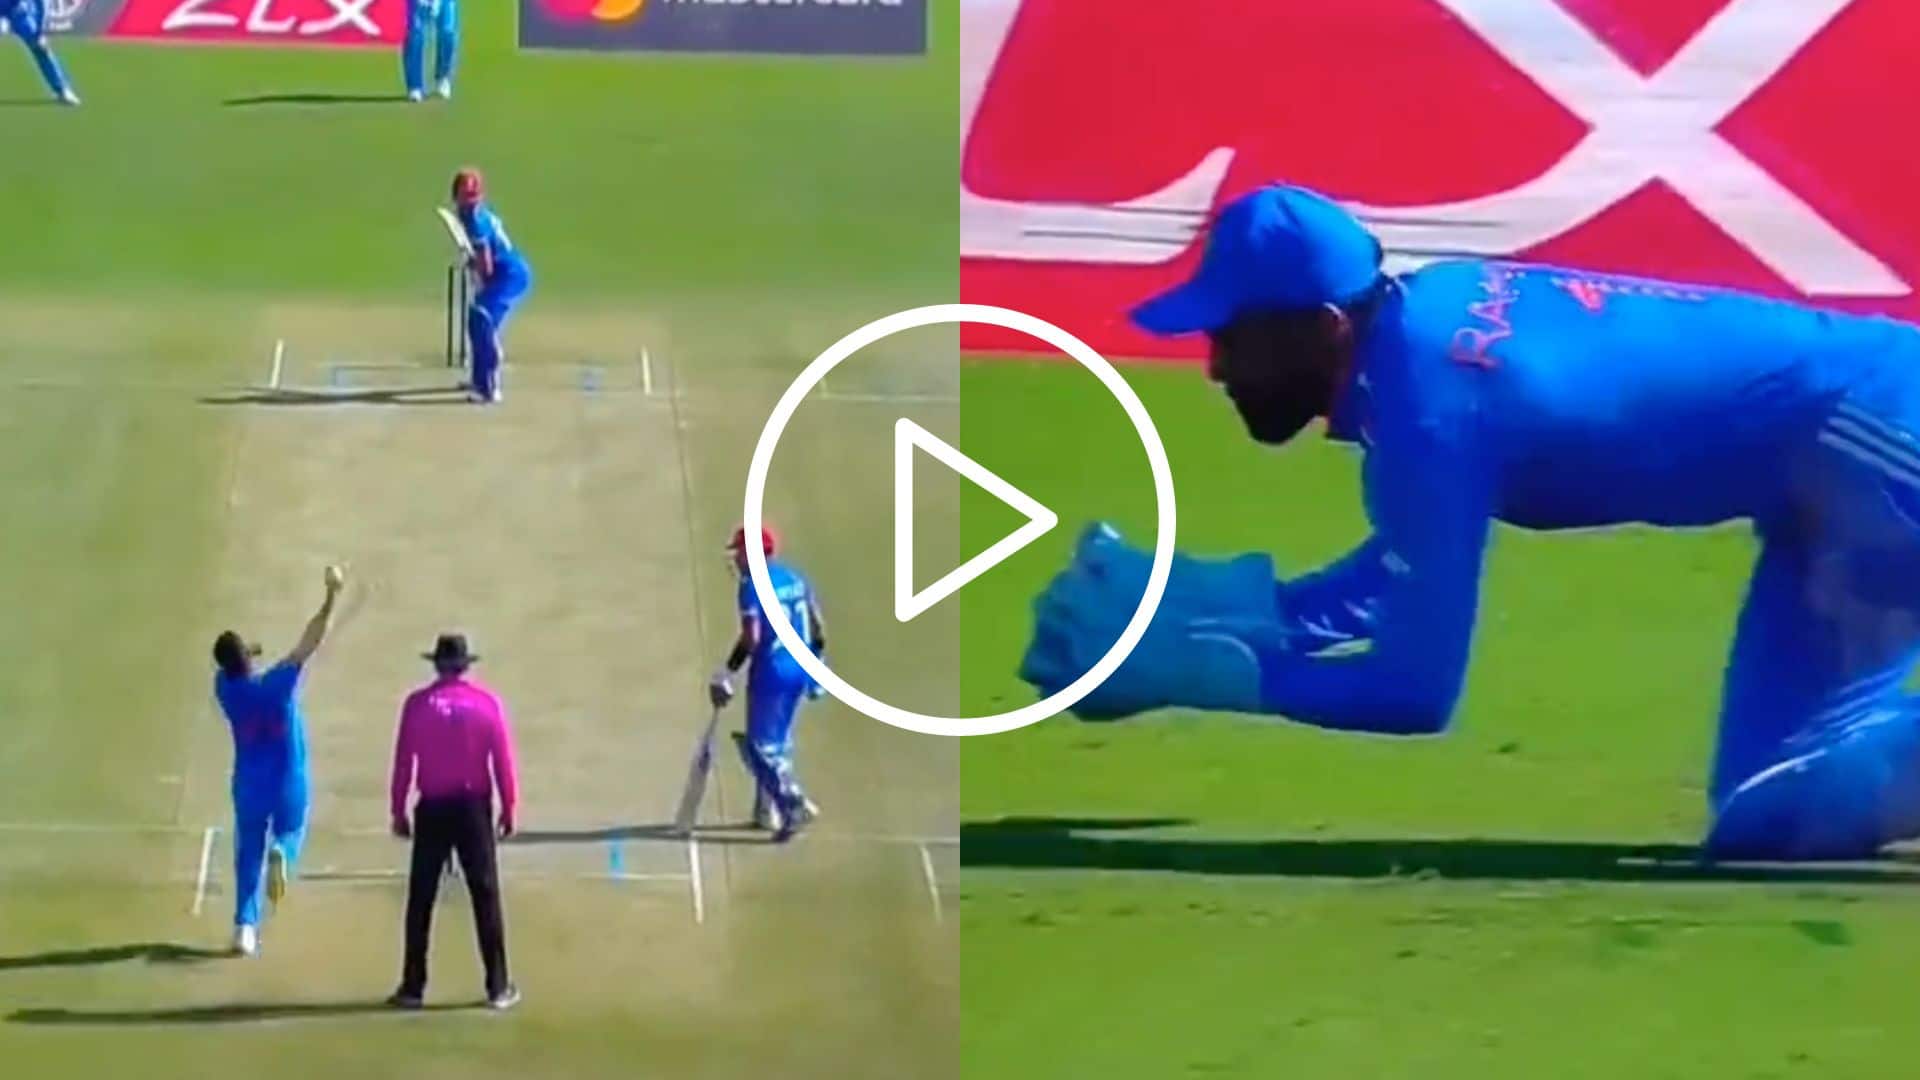 [Watch] Jasprit Bumrah Draws First Blood As KL Rahul Takes A ‘Jaw-Dropping’ Catch